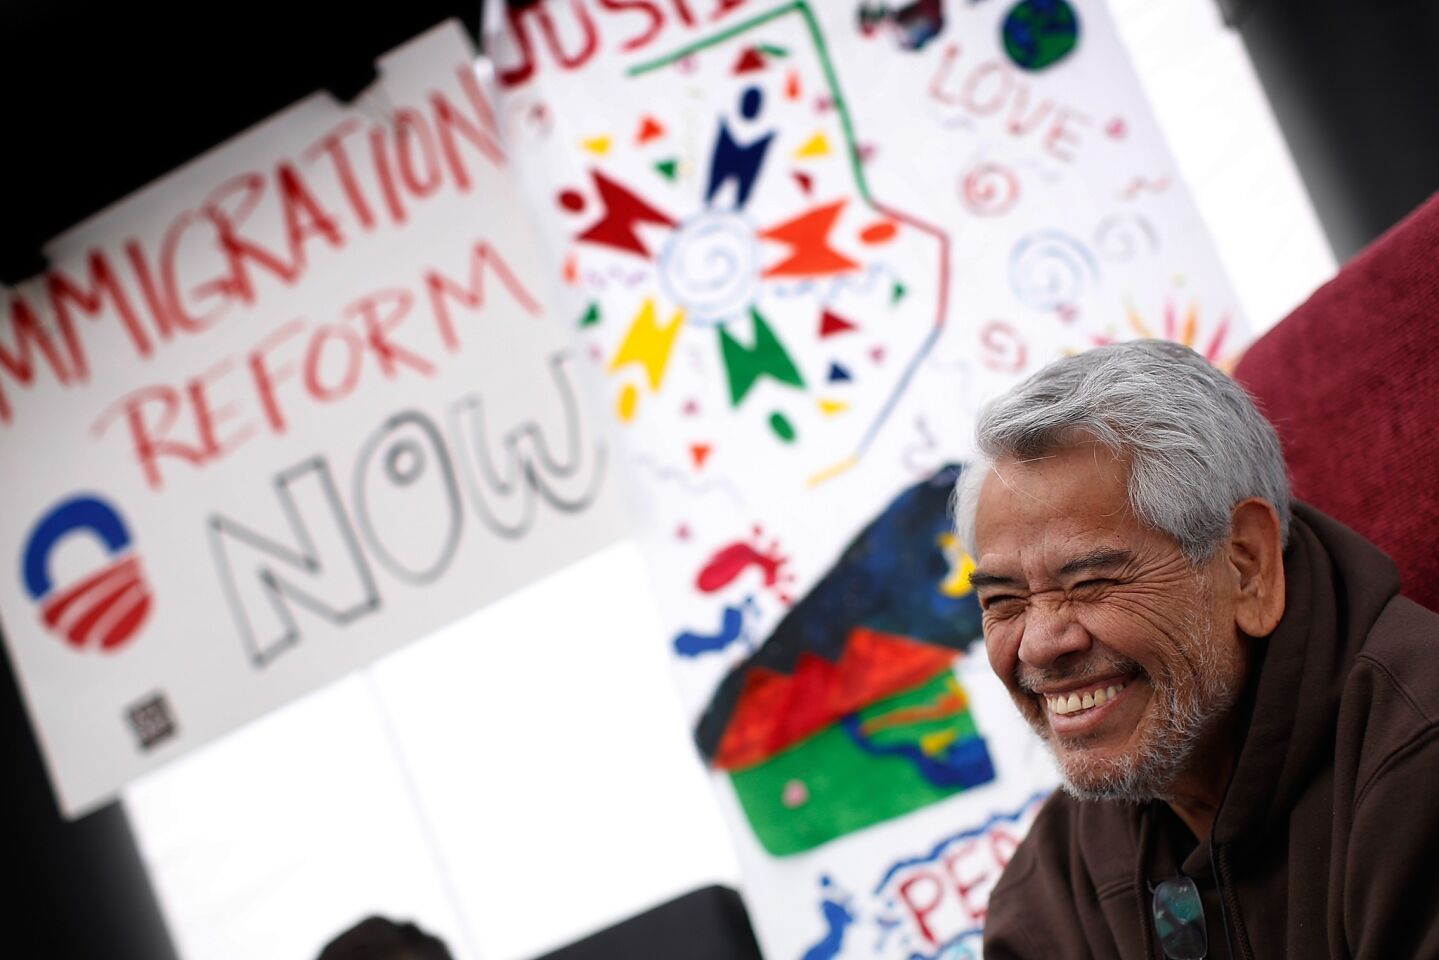 Eliseo Medina, who fasted in support of immigration reform with the Fast for Families movement, talks with fellow fasters on the National Mall in Washington, D.C.